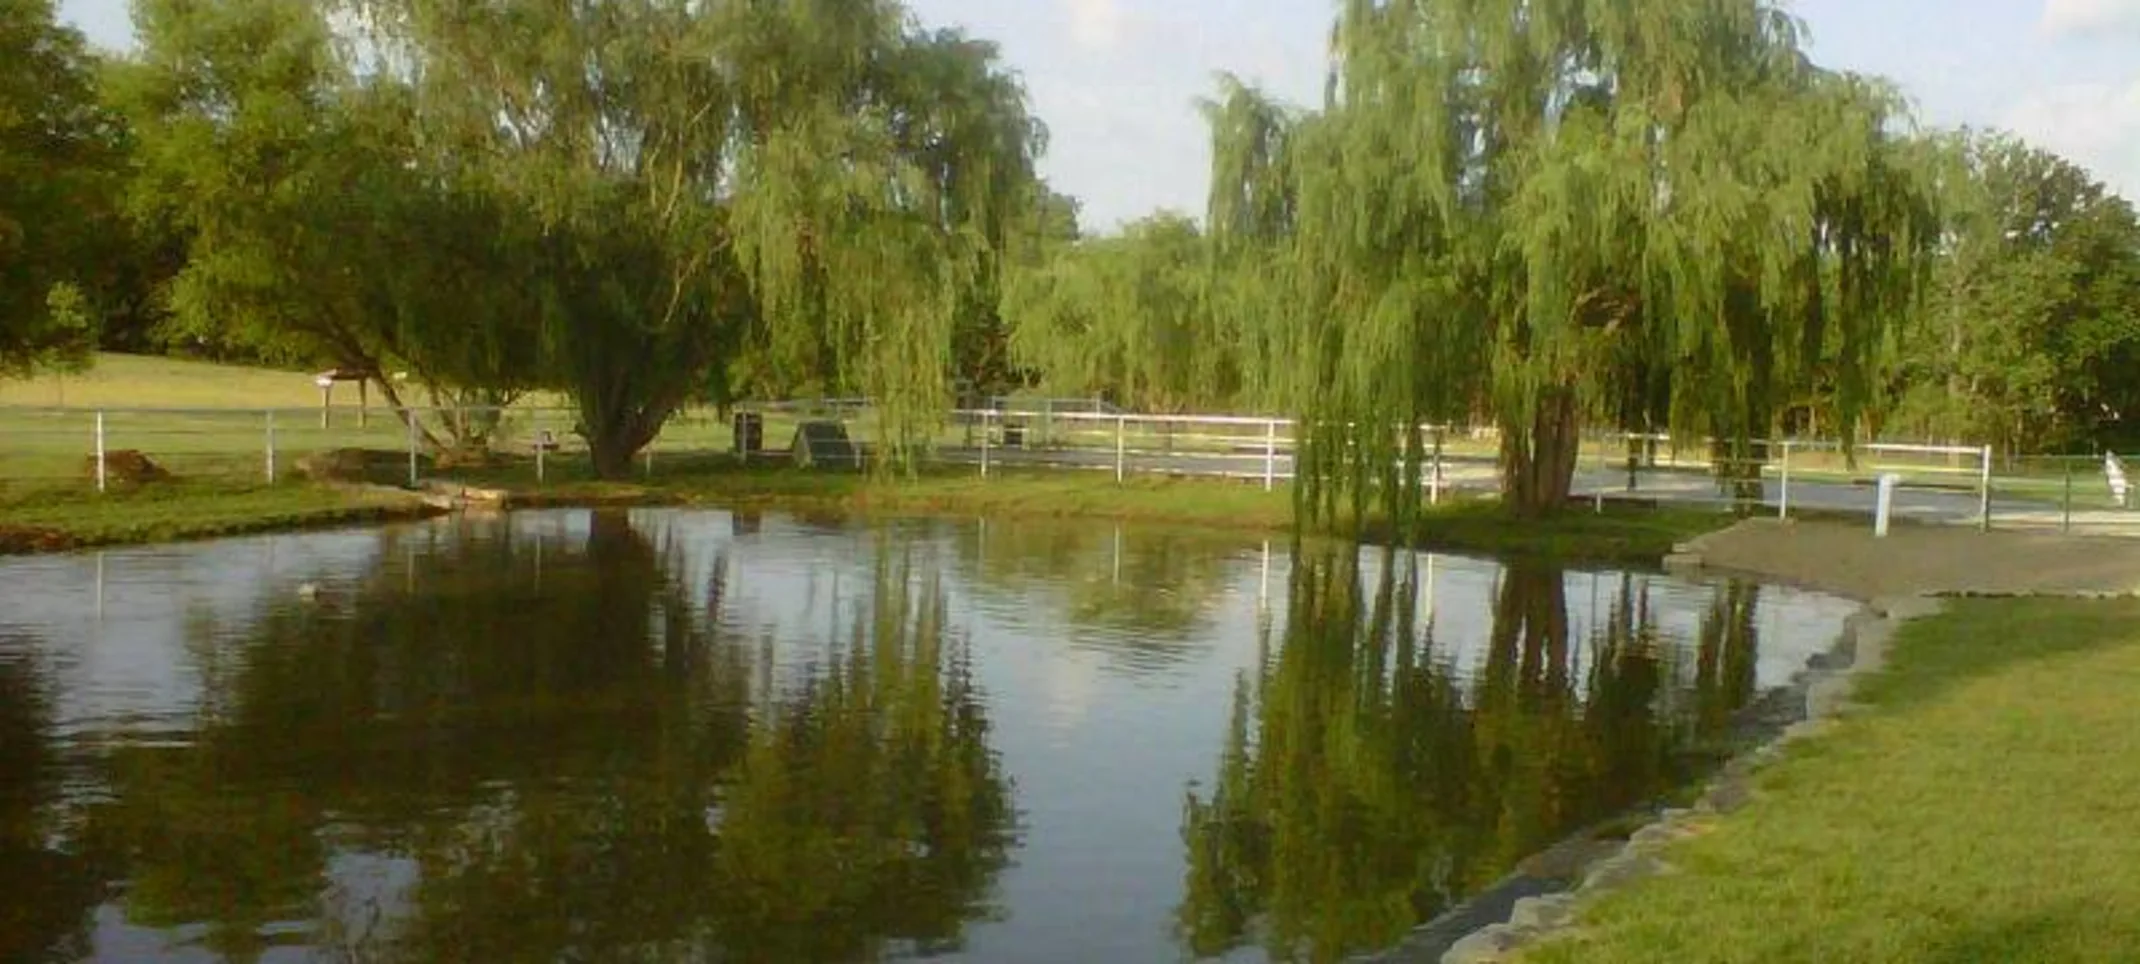 The lake and pond outside of The Pet Ranch